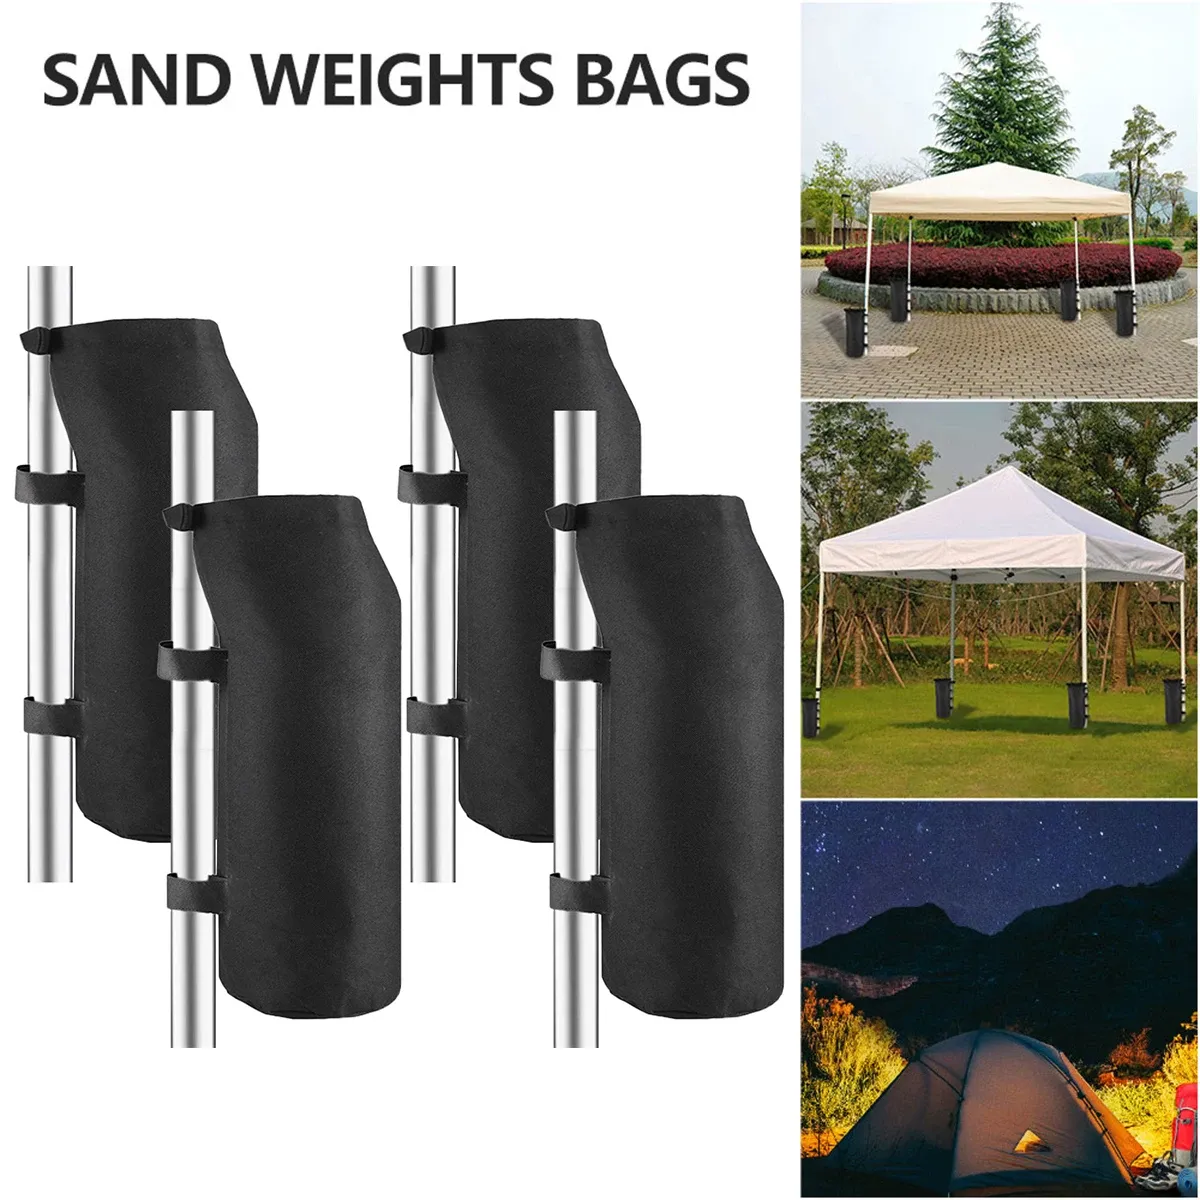 Gazebos 4Pcs 16" Weight Sand Bag 600D Oxford Fabric Canopy Weight Bags Canopy Weights Gazebo Tent Sand Bags for Outdoor Pop Up Canopy